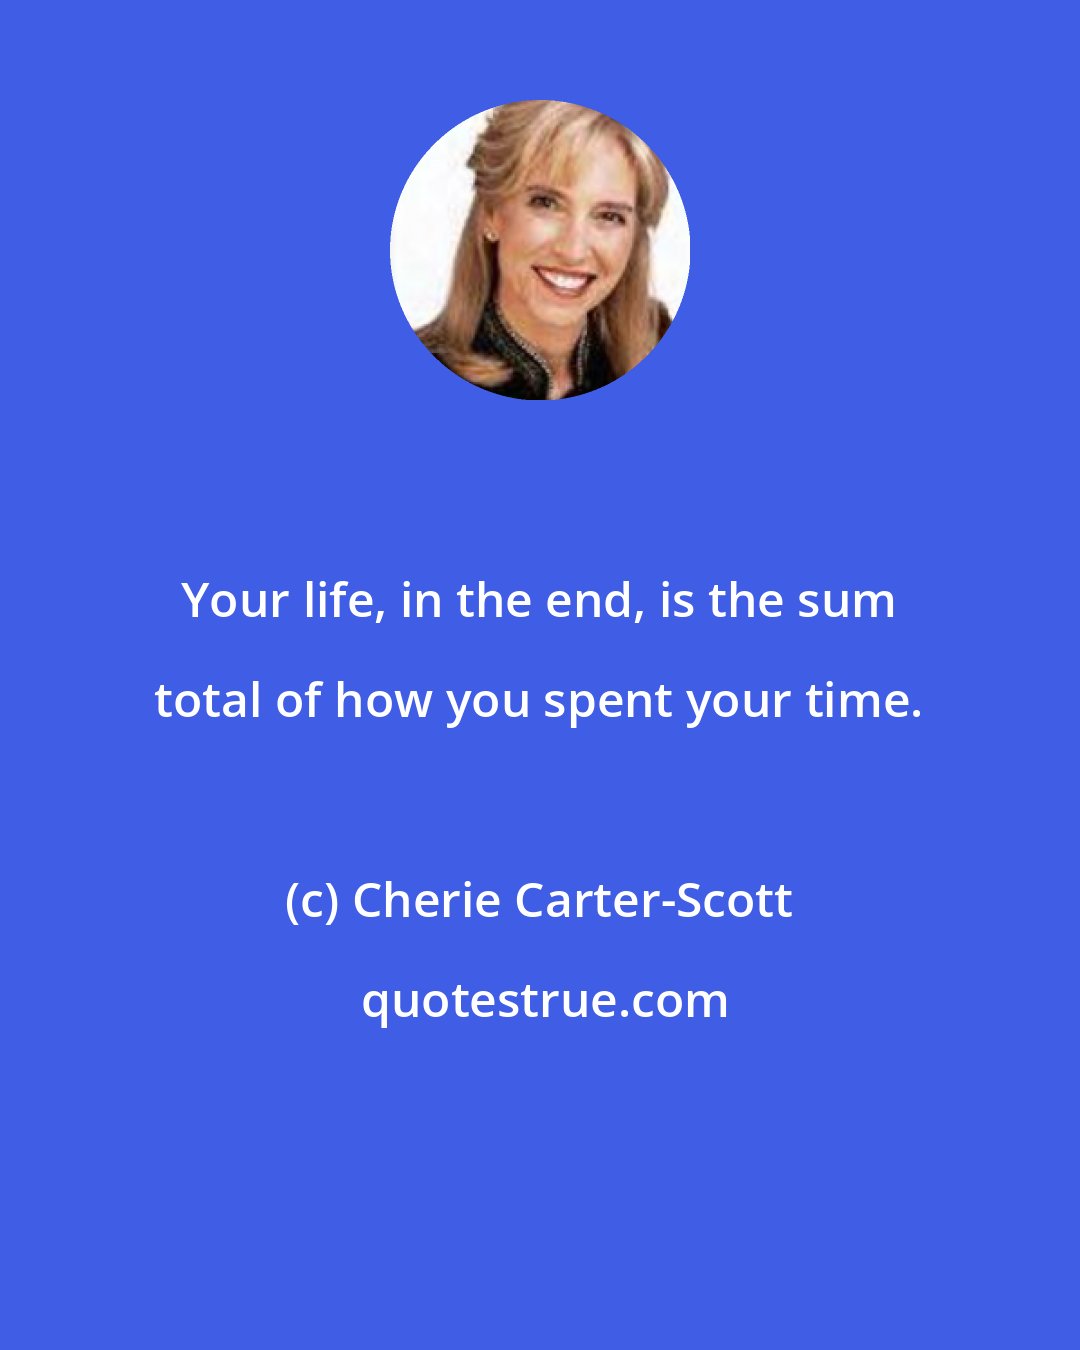 Cherie Carter-Scott: Your life, in the end, is the sum total of how you spent your time.